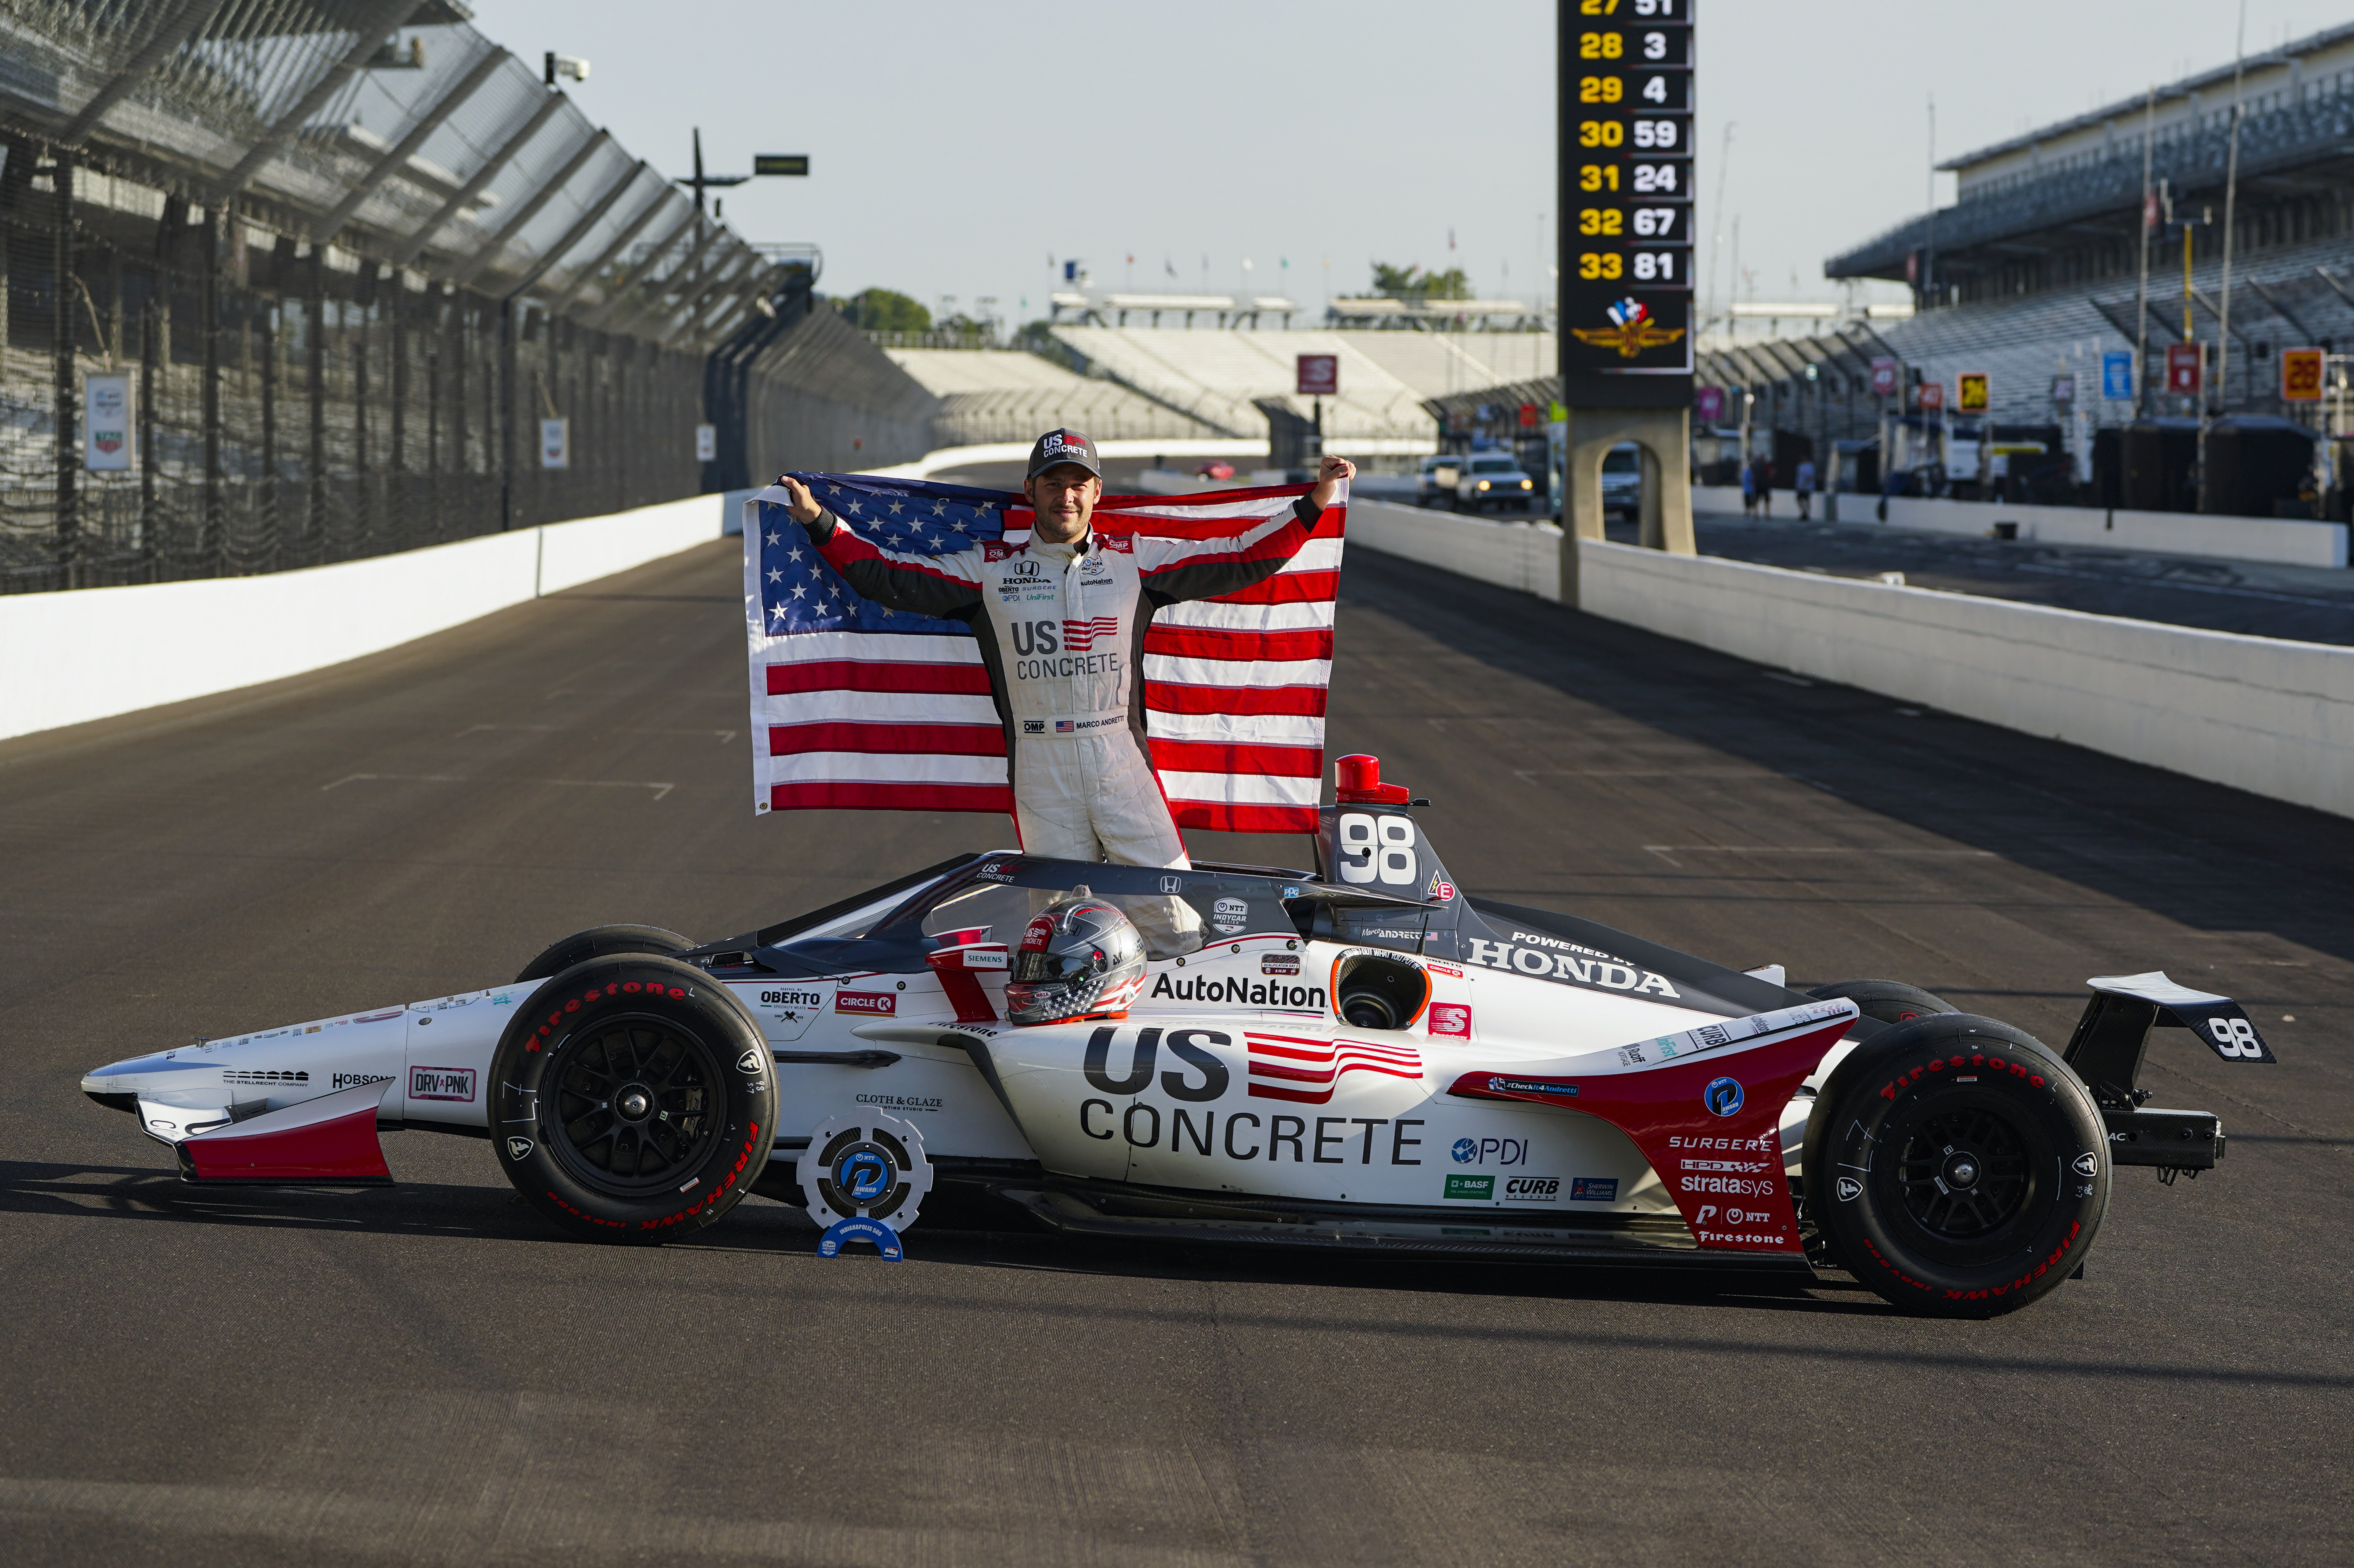 Indianapolis 500 2020 FREE LIVE STREAM (8/23/20): Watch 104th running of In...